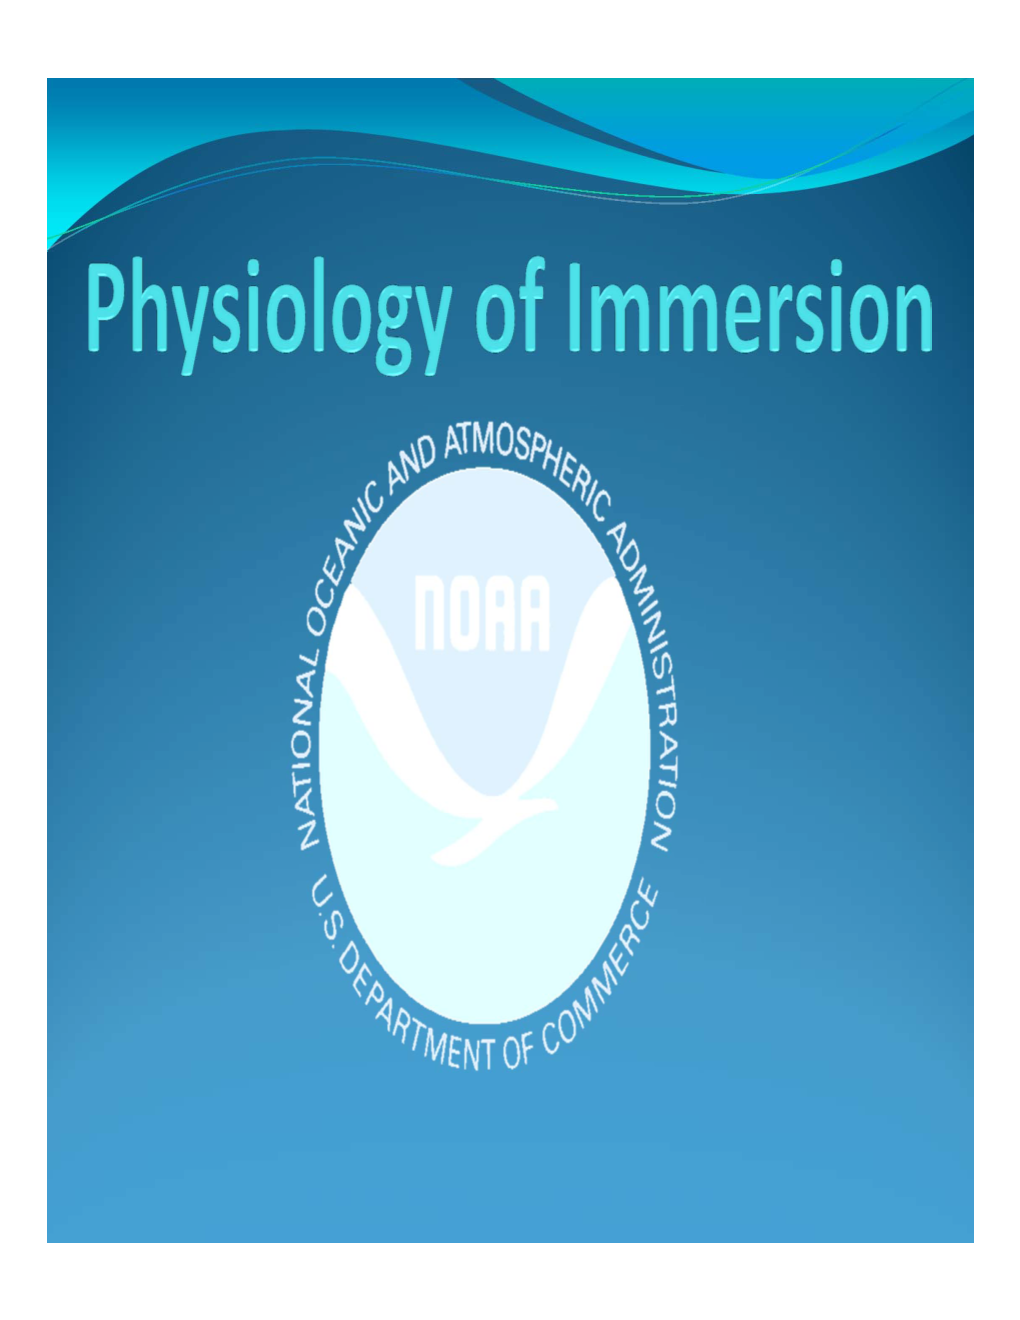 Physiology of Immersion.Pdf